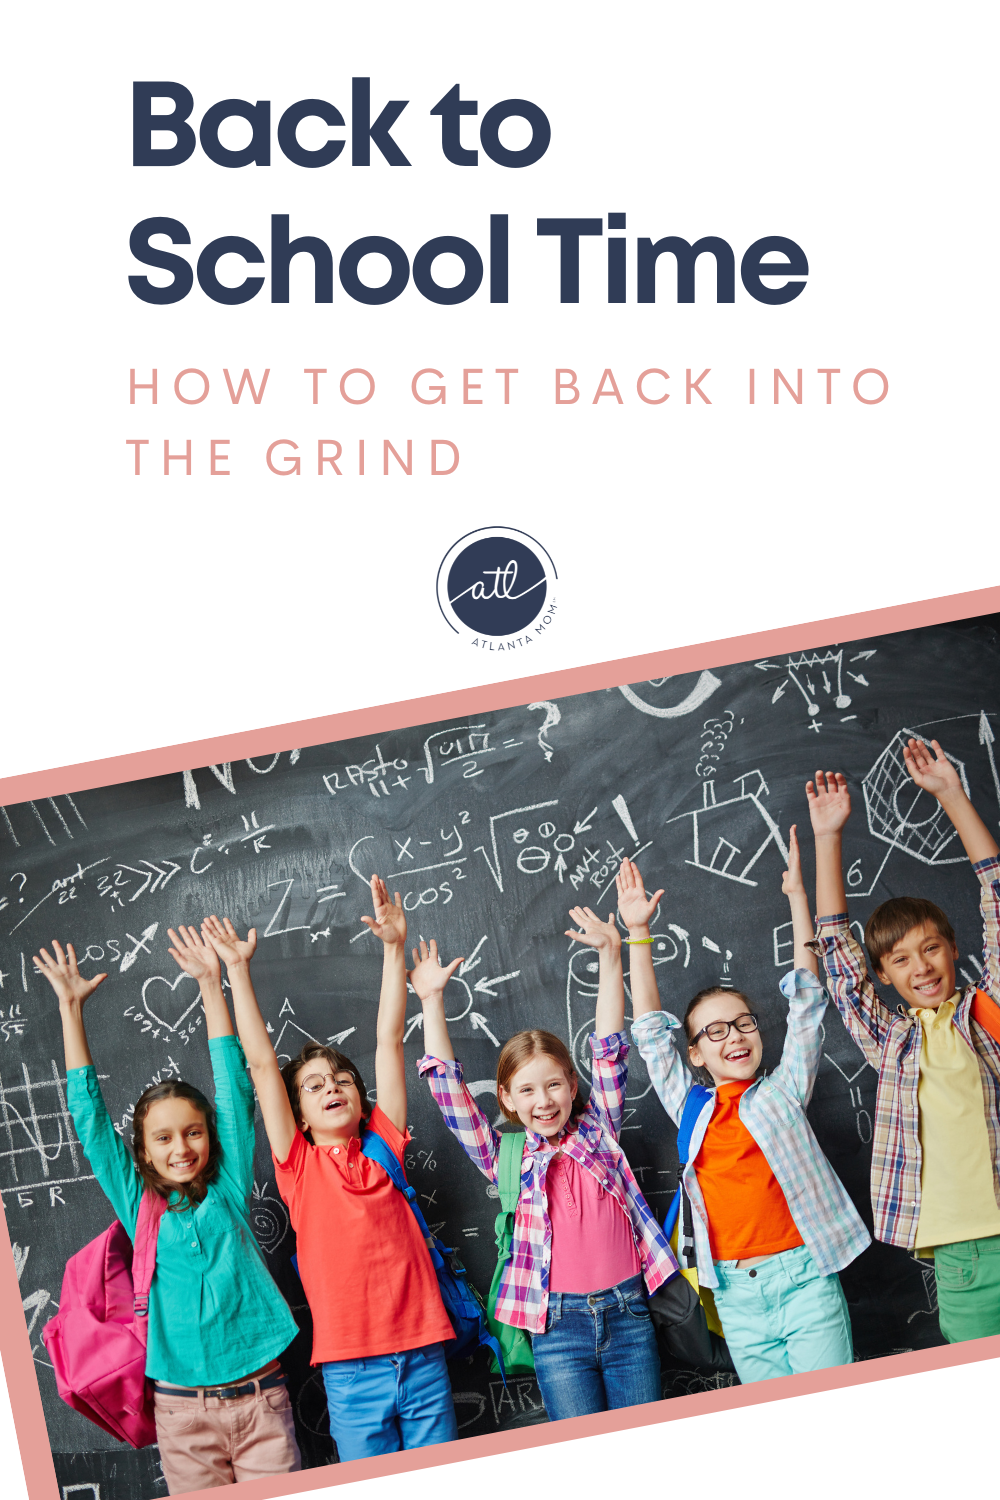 Back-to-School Time How to Get Back Into the Grind